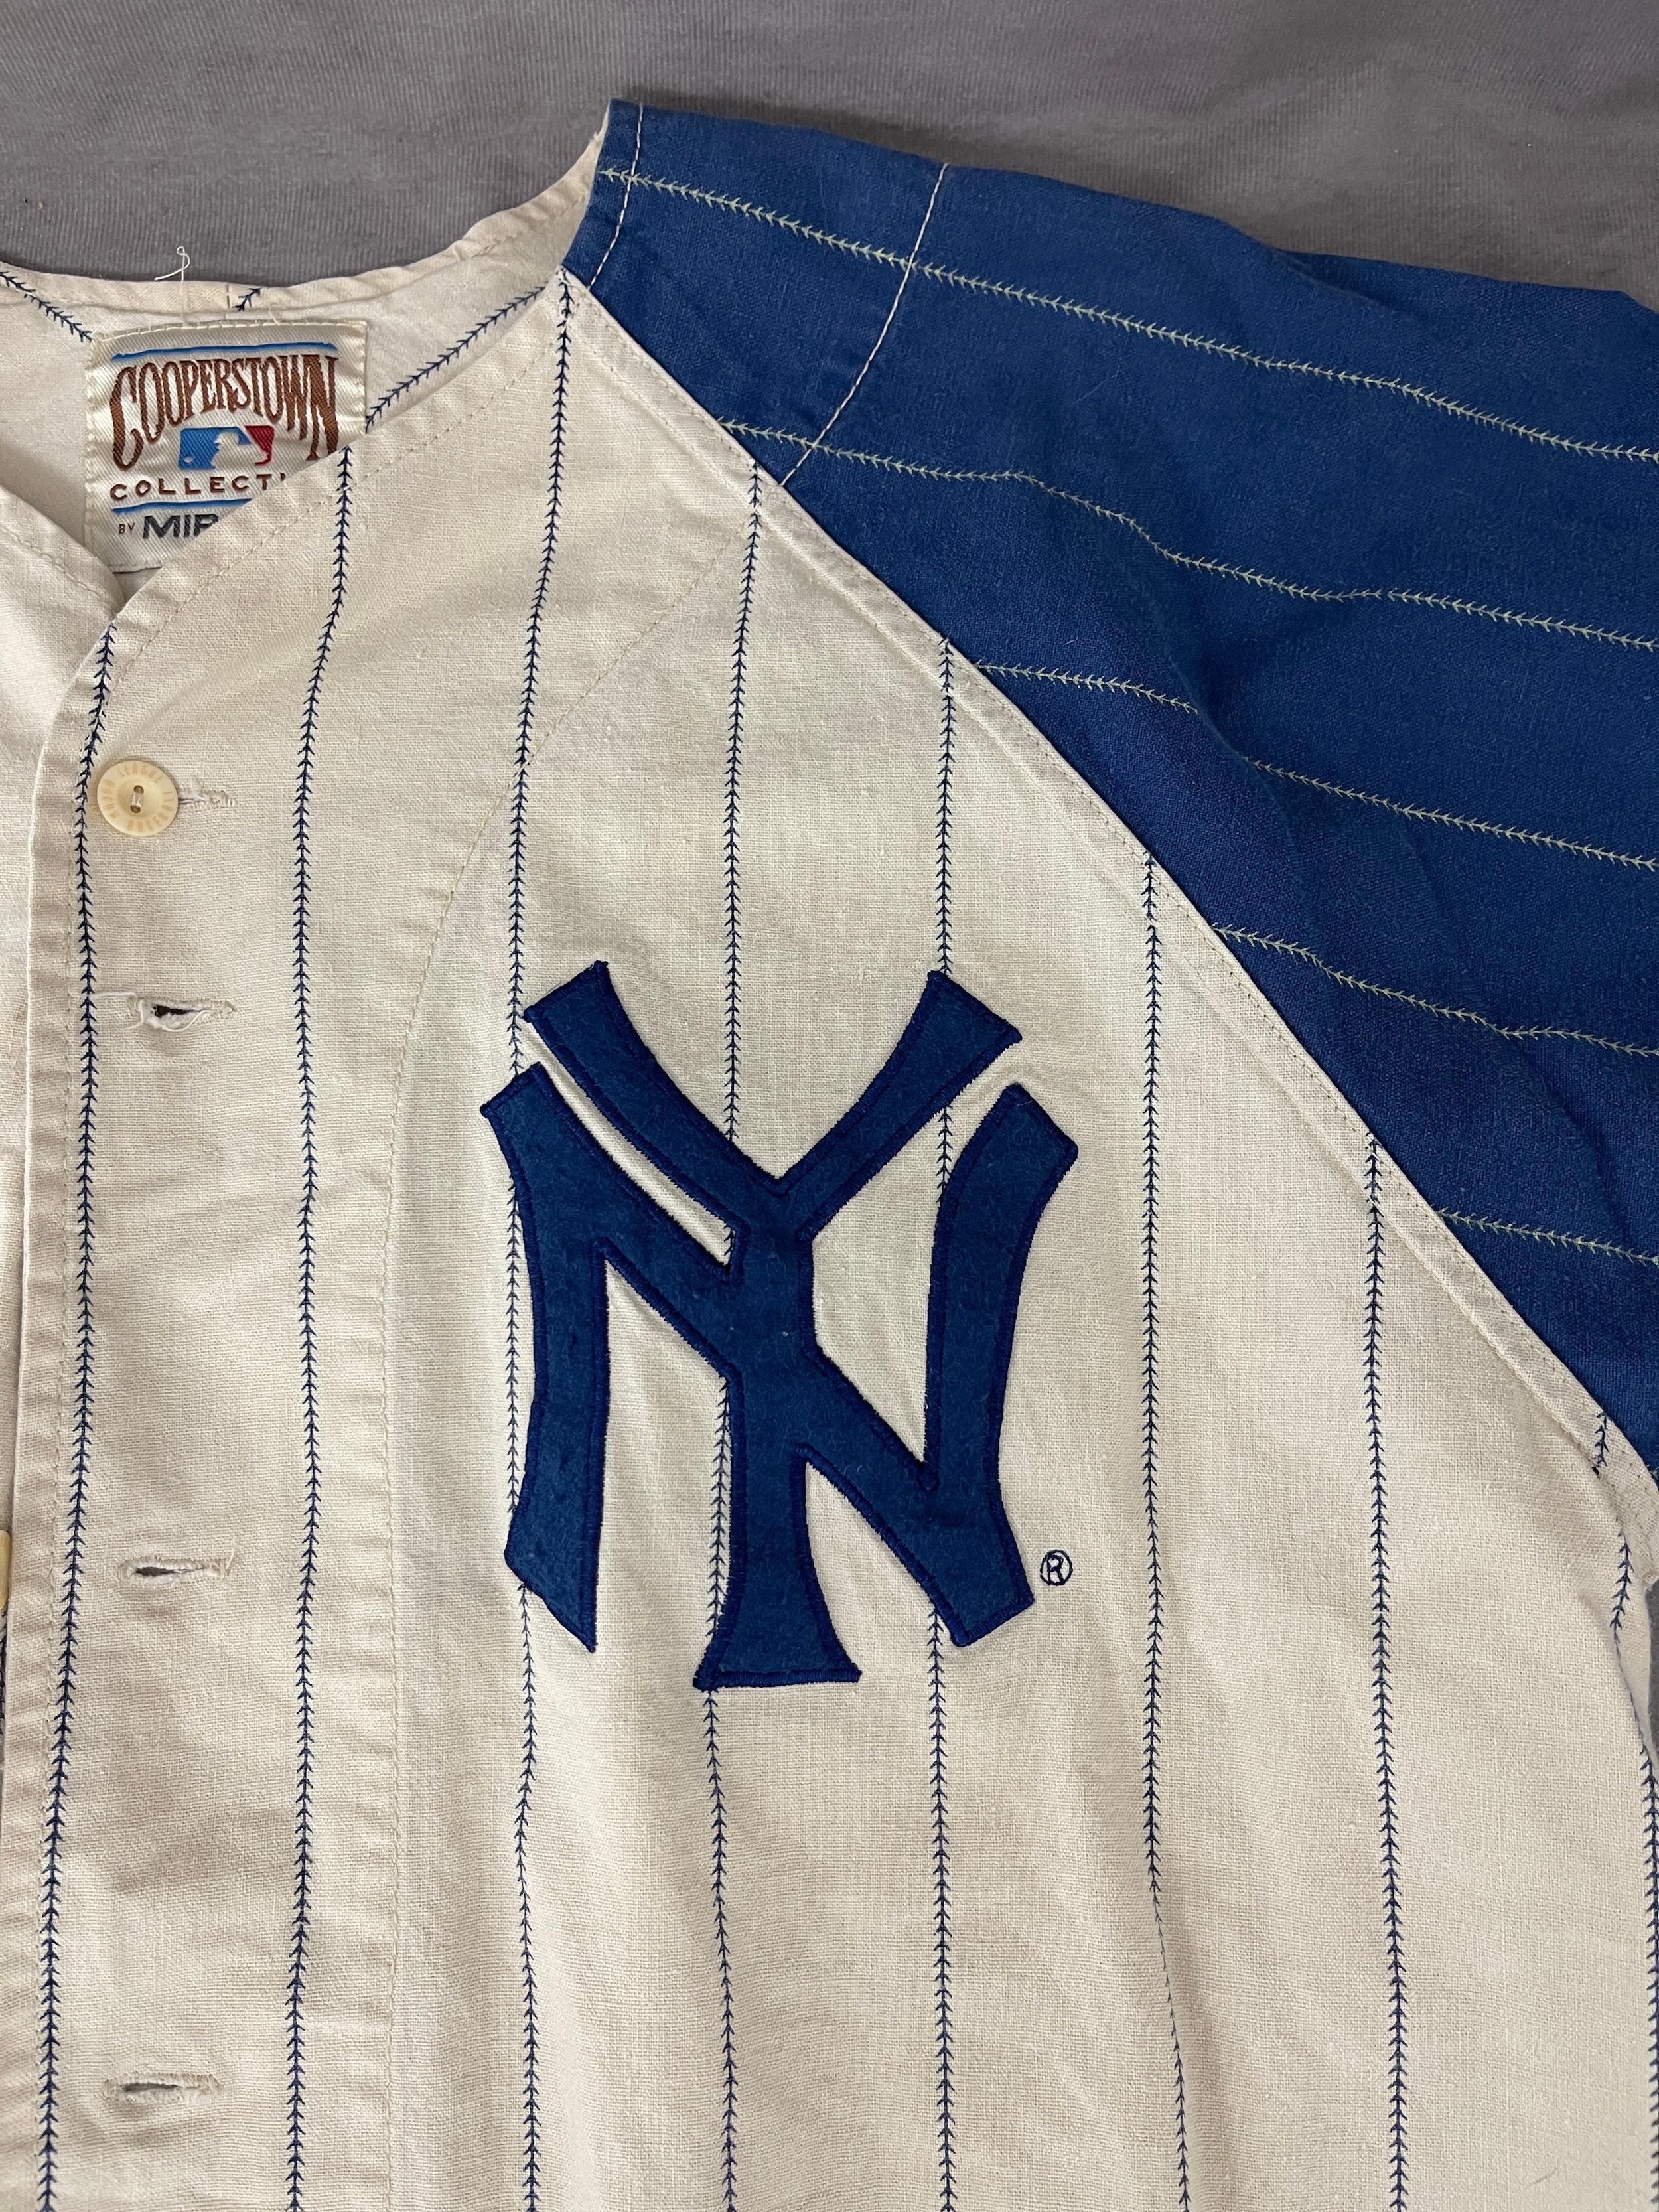 Babe Ruth Cooperstown Collection Yankees Babe Ruth Jersey